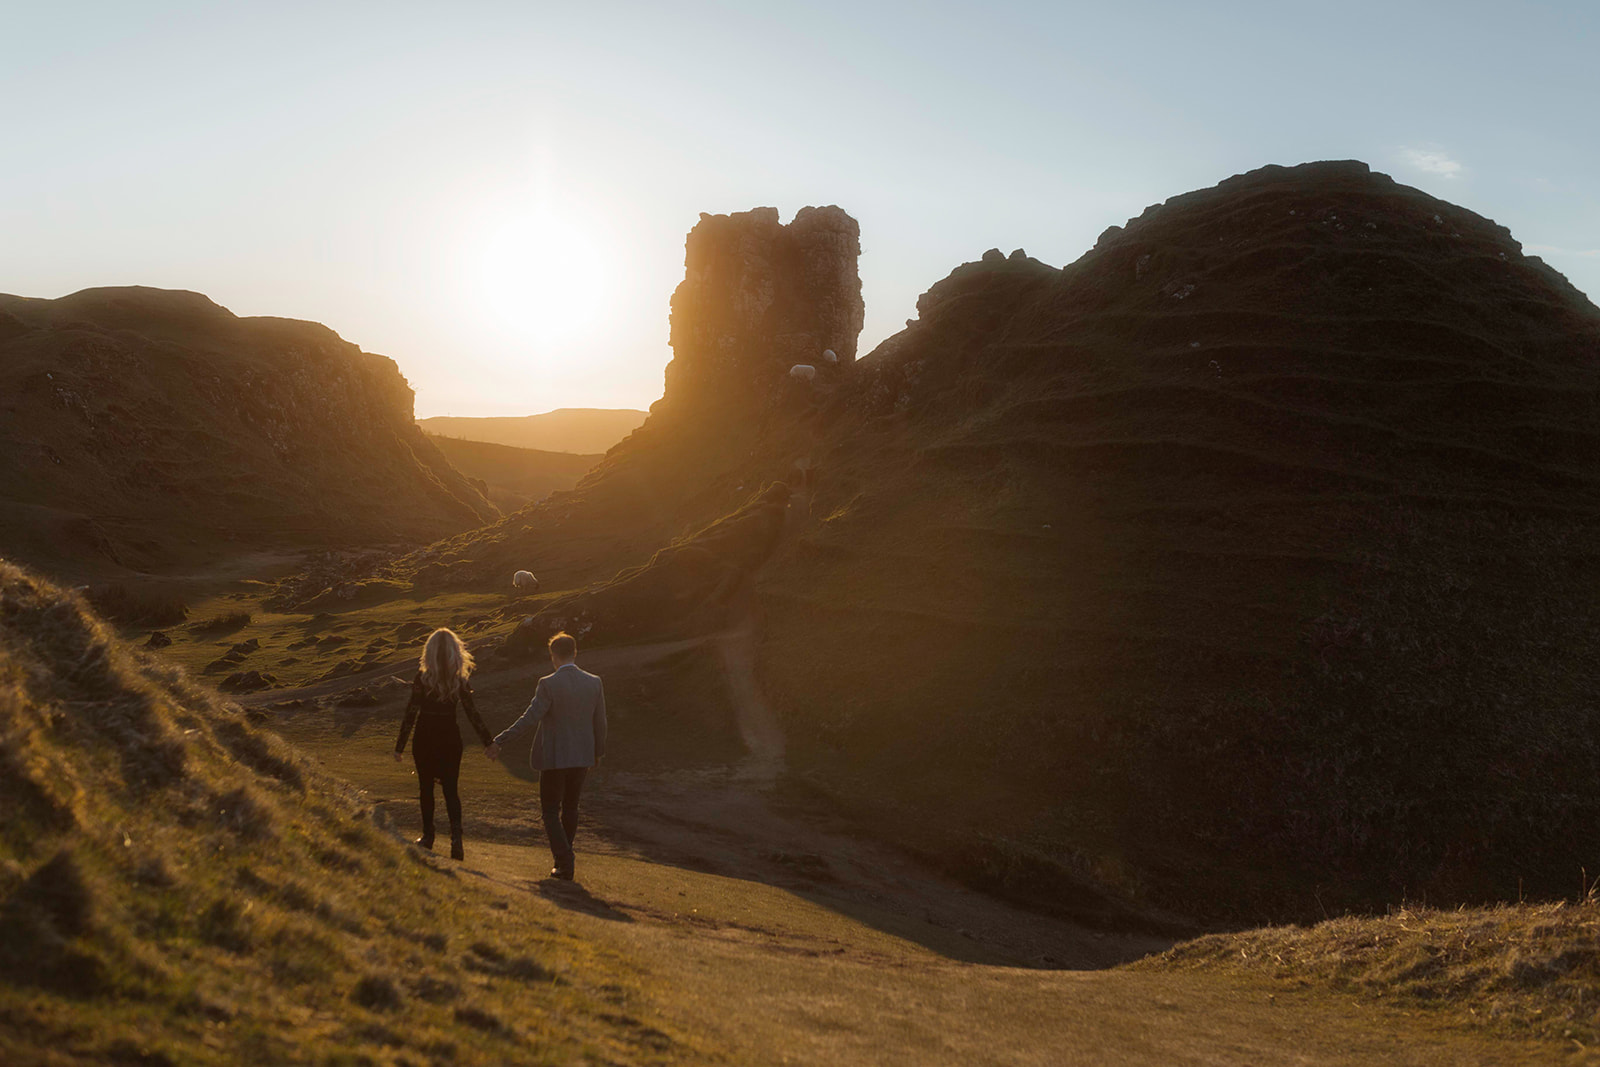 Kara and Andy shared a romantic moment at the Isle of Skye, Scotland with the beautiful sunset as their backdrop